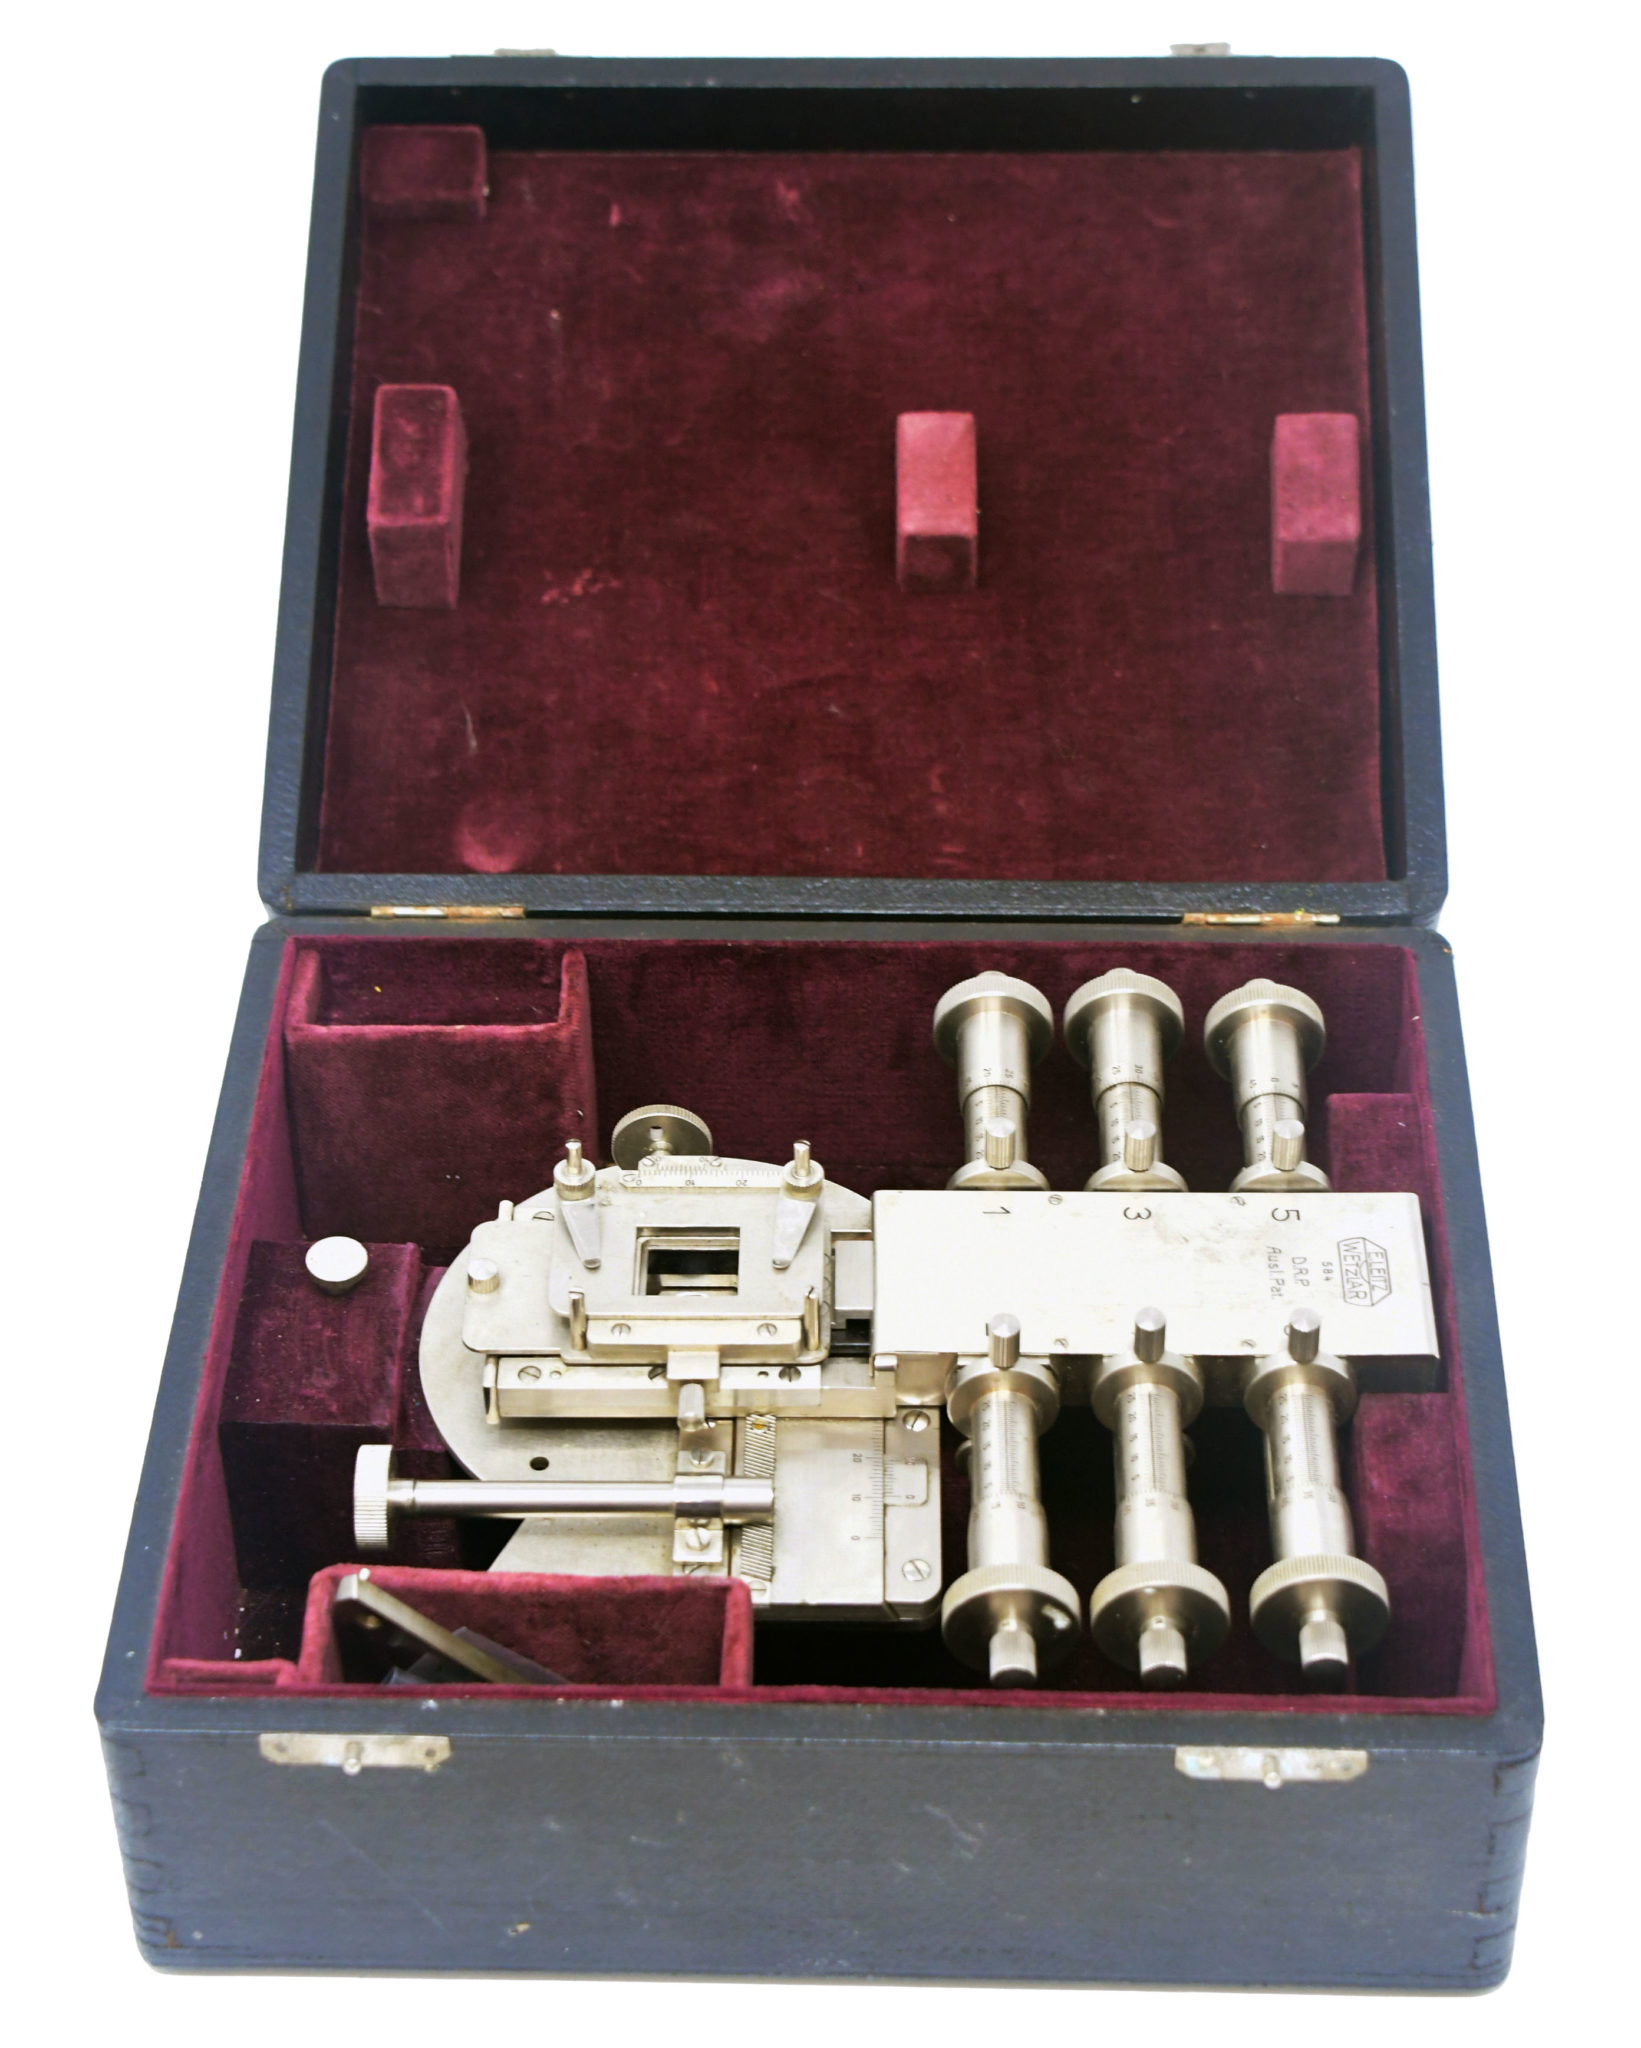 Early six-spindle integrating stage for the microscope by E. Leitz, ca. 1930